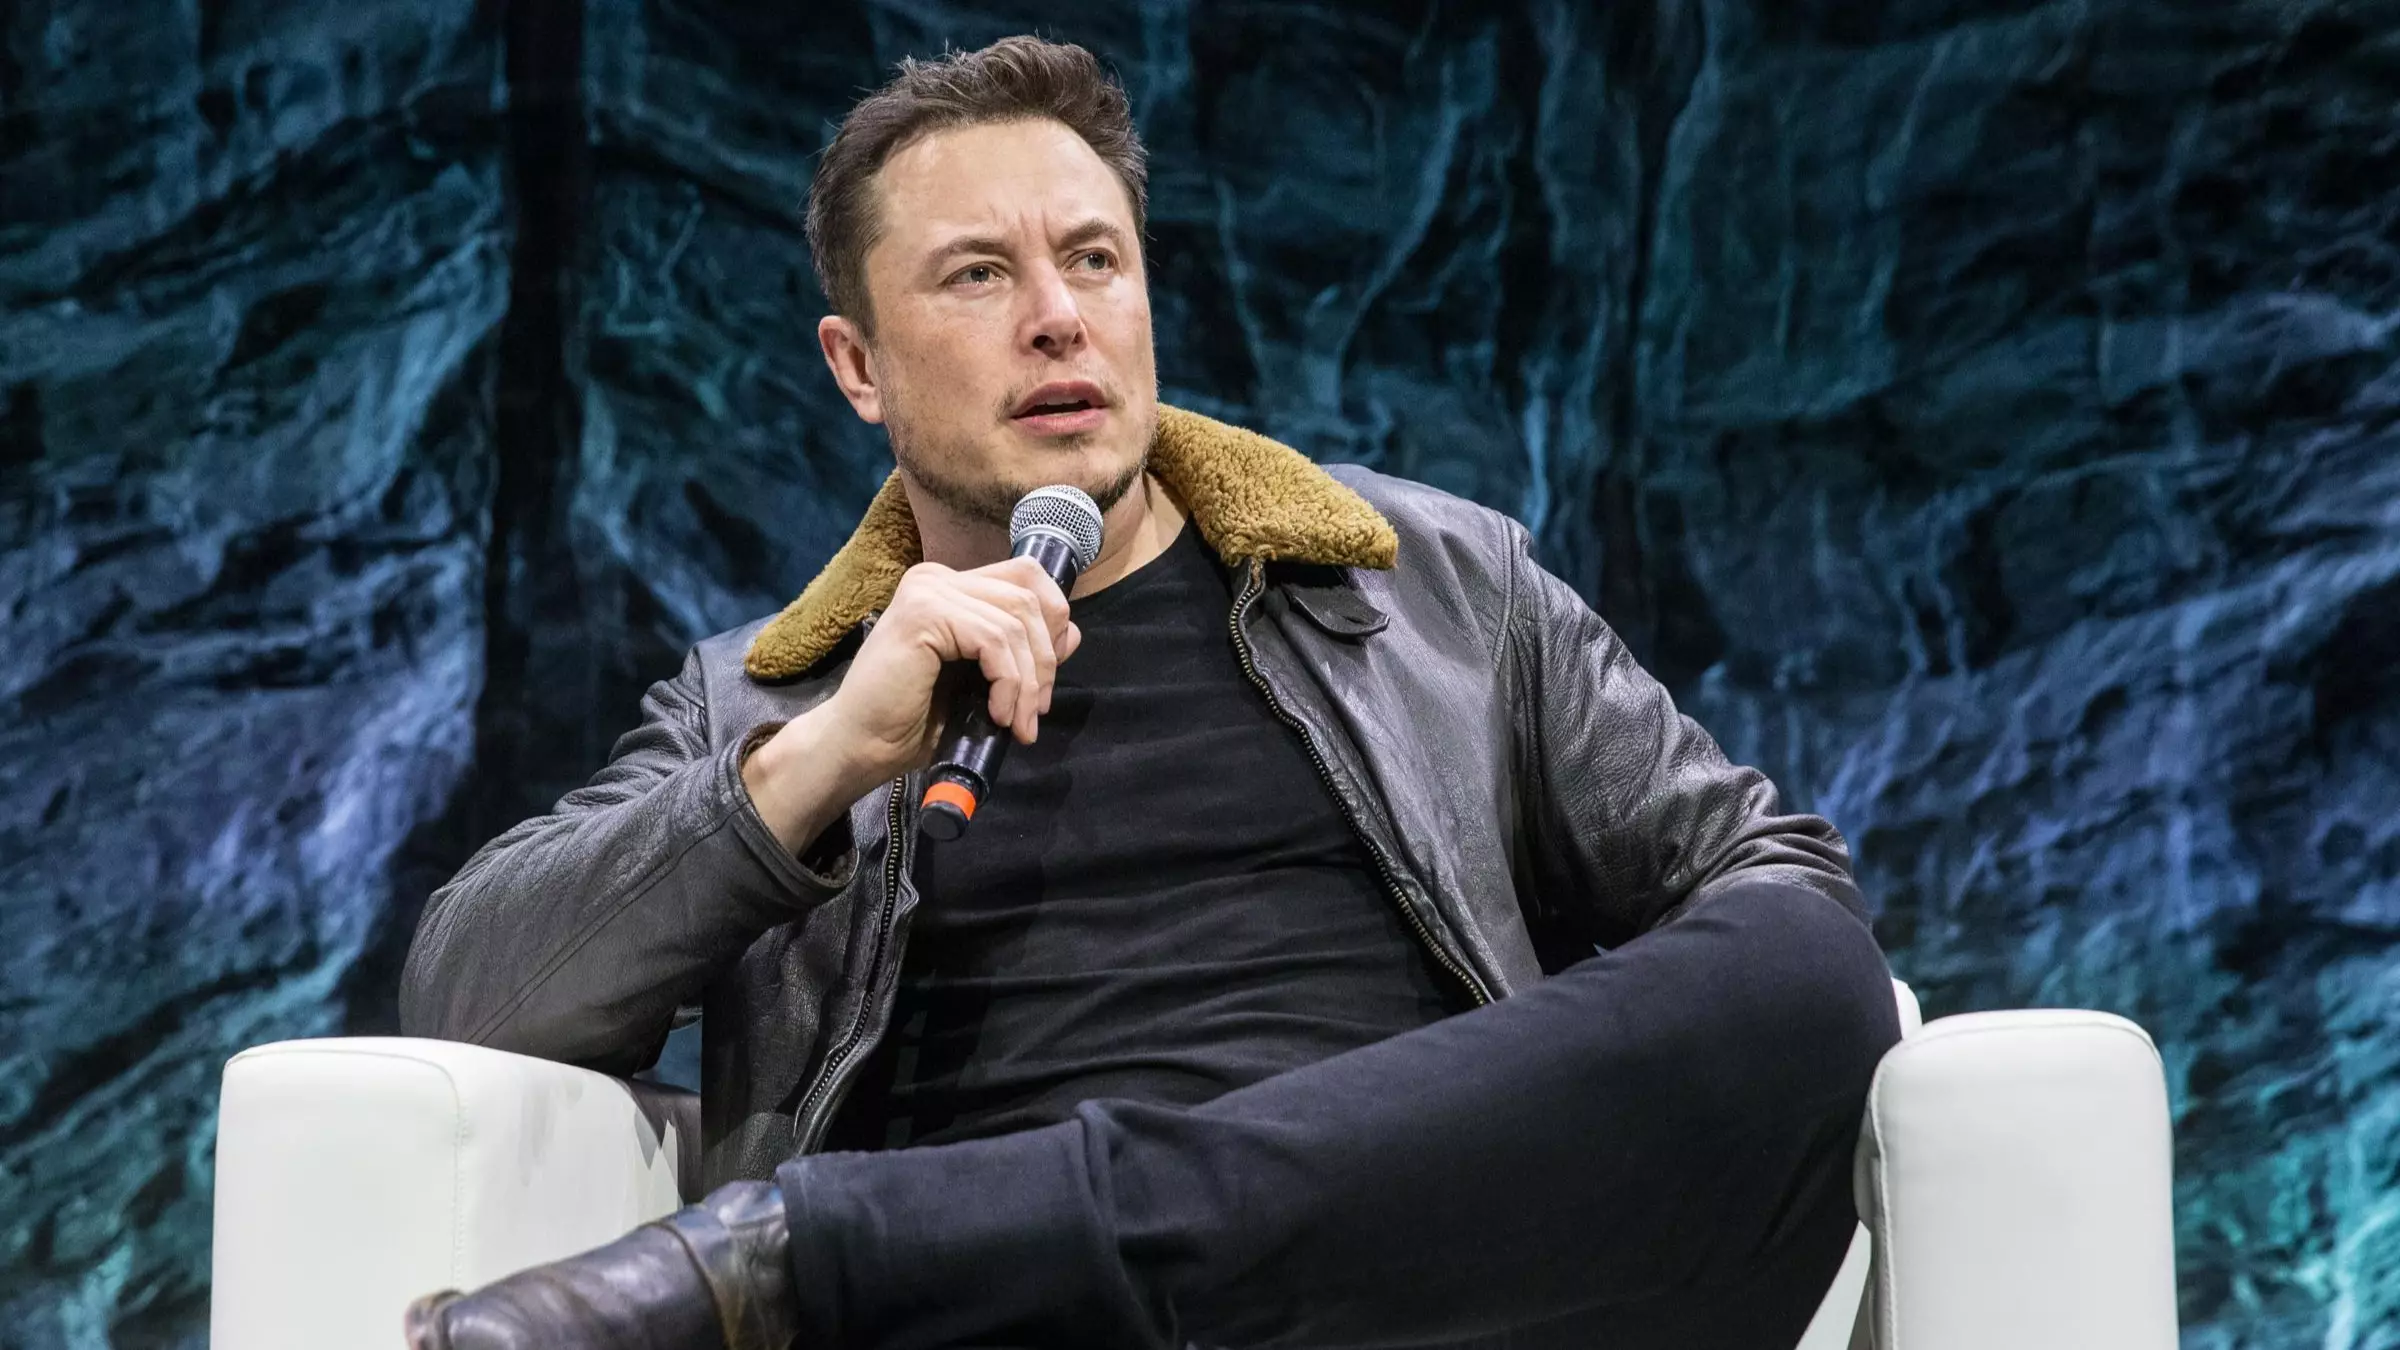 The Matrix Director Says 'F*** You' To Elon Musk After He Tweeted About Taking 'The Red Pill'